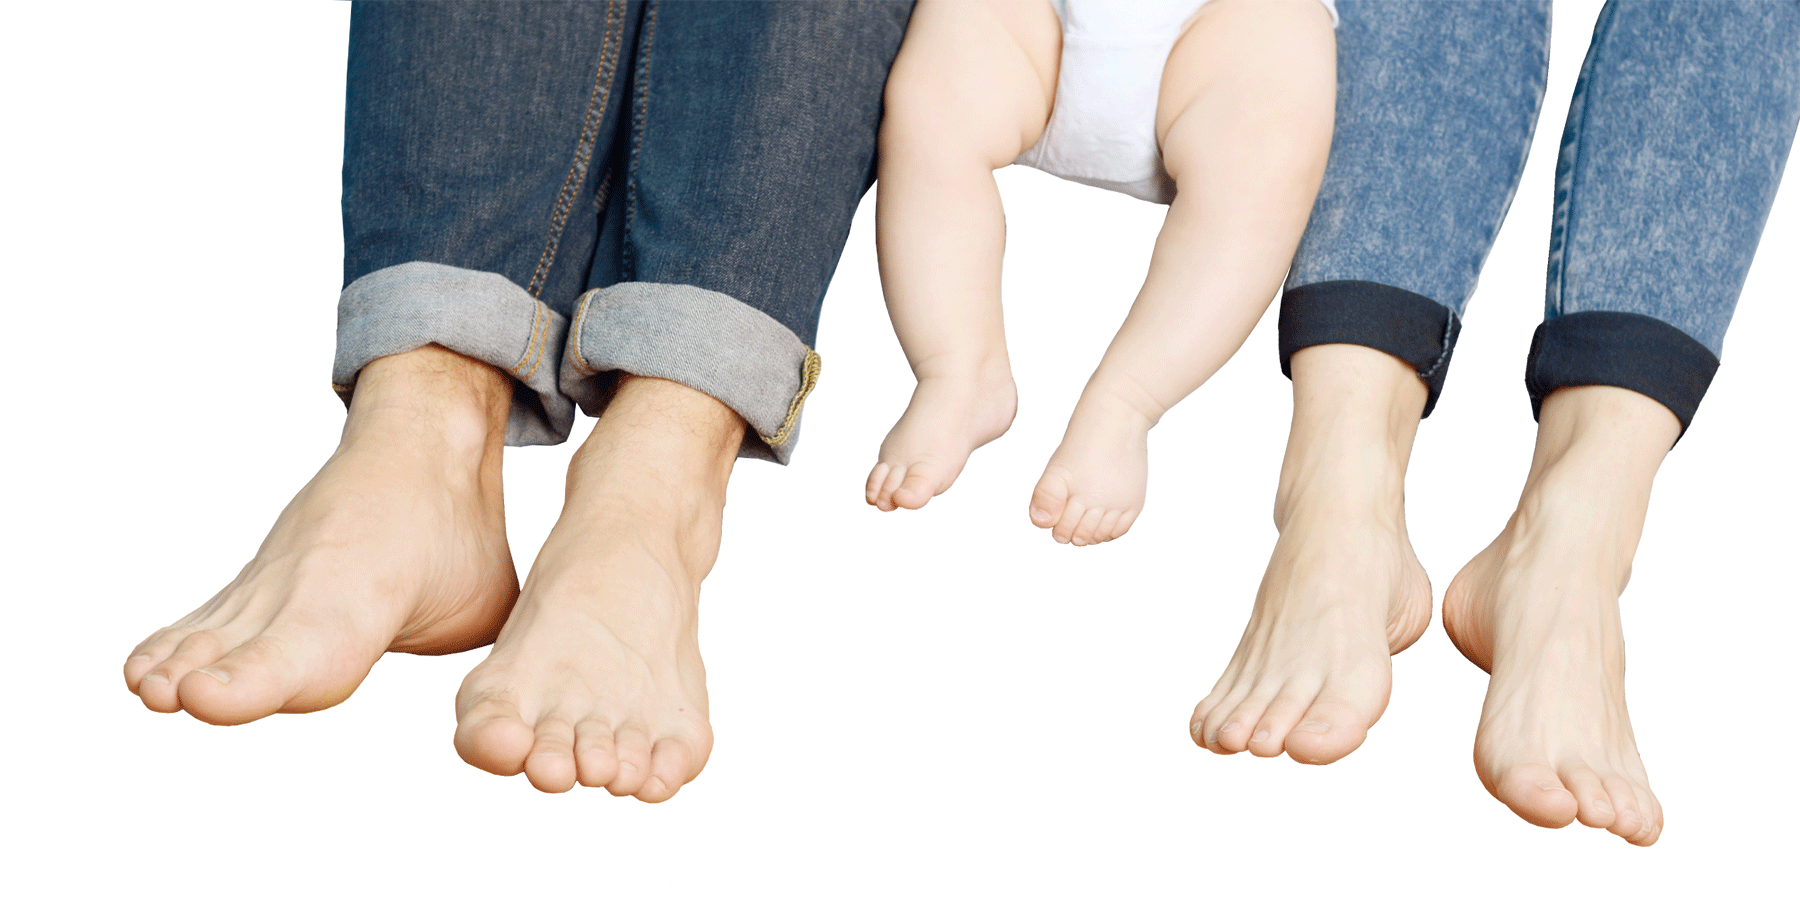 feet of young family on the floor